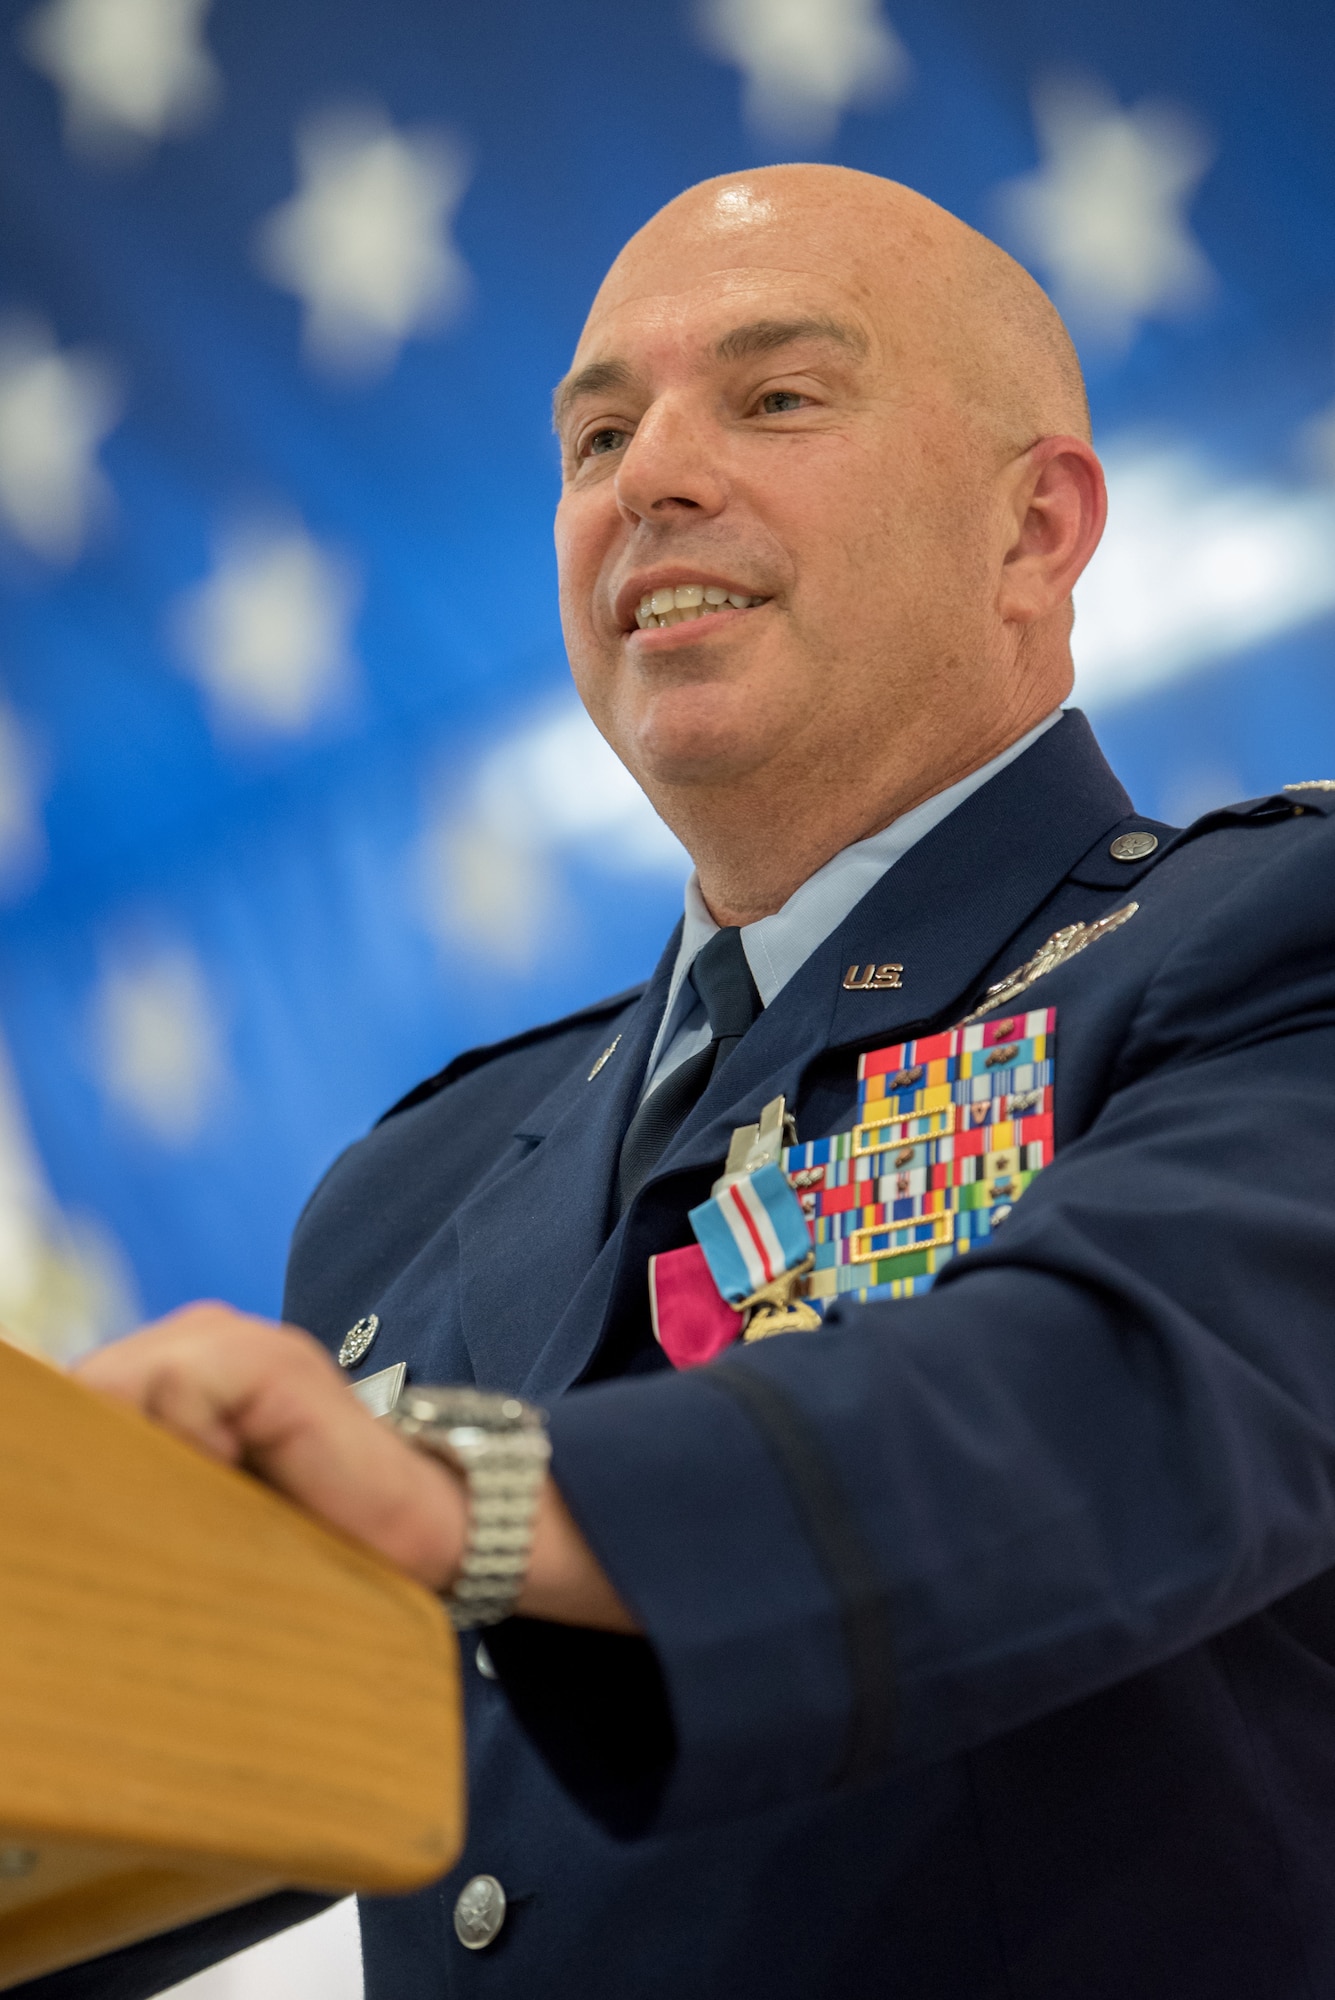 Col. Ken Dale, outgoing commander of the 123rd Maintenance Group, addresses the crowd during his retirement ceremony at the Kentucky Air National Guard Base in Louisville, Ky., on Dec. 1, 2018. Dale is retiring after more than 38 years of service to the Kentucky Air National Guard. (U.S. Air National Guard photo by Staff Sgt. Joshua Horton)